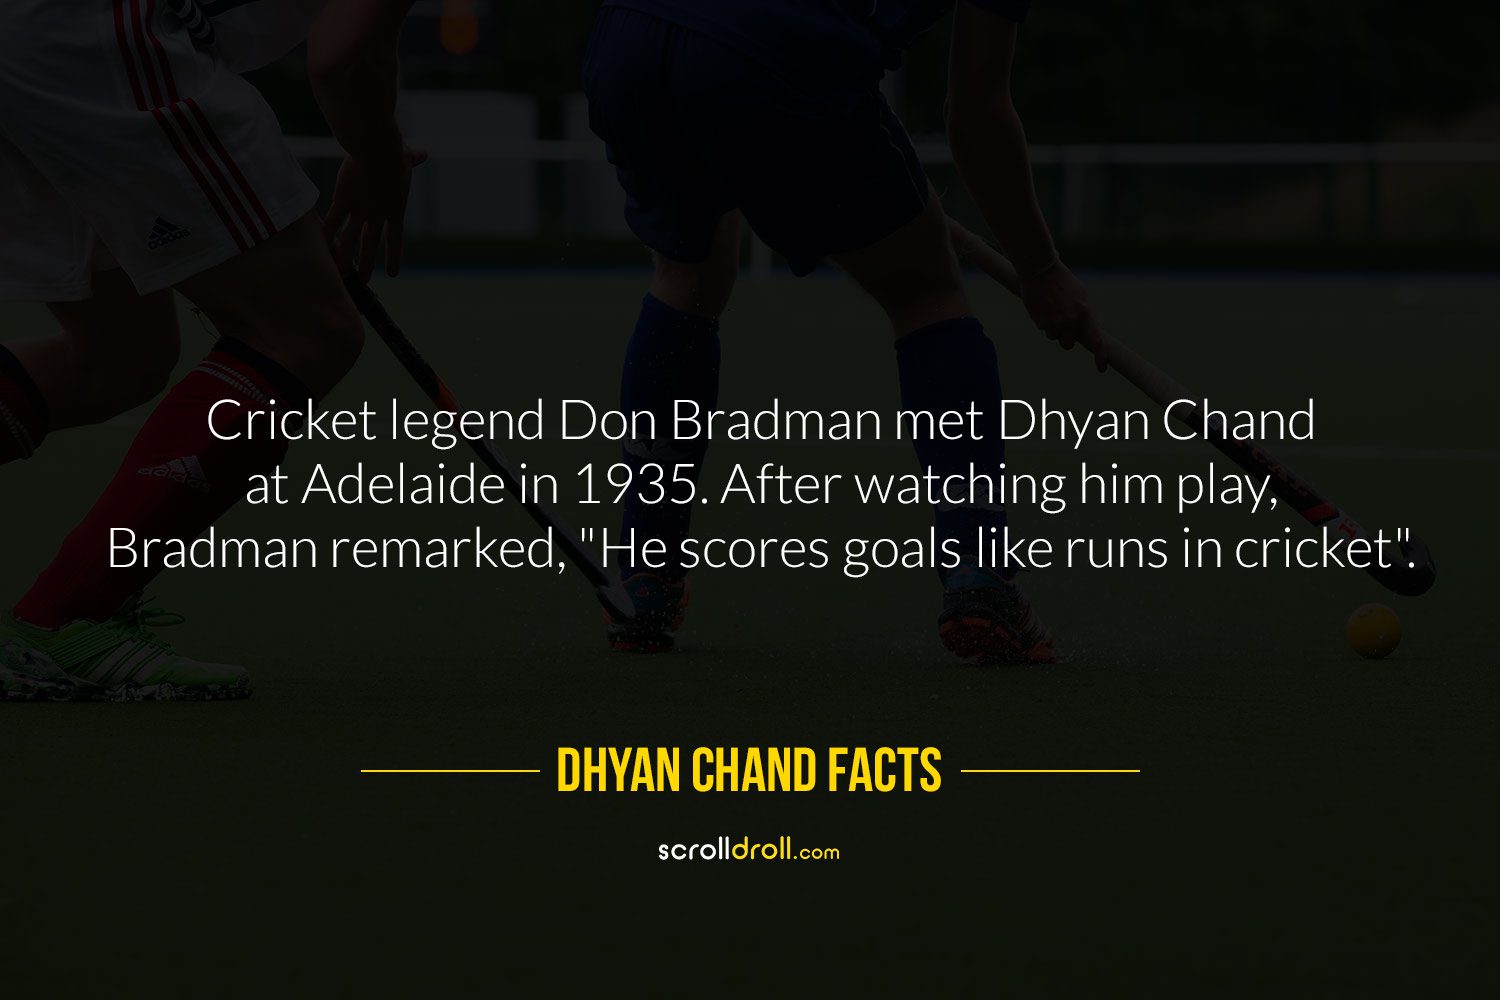 Dhyanchand-Facts-10